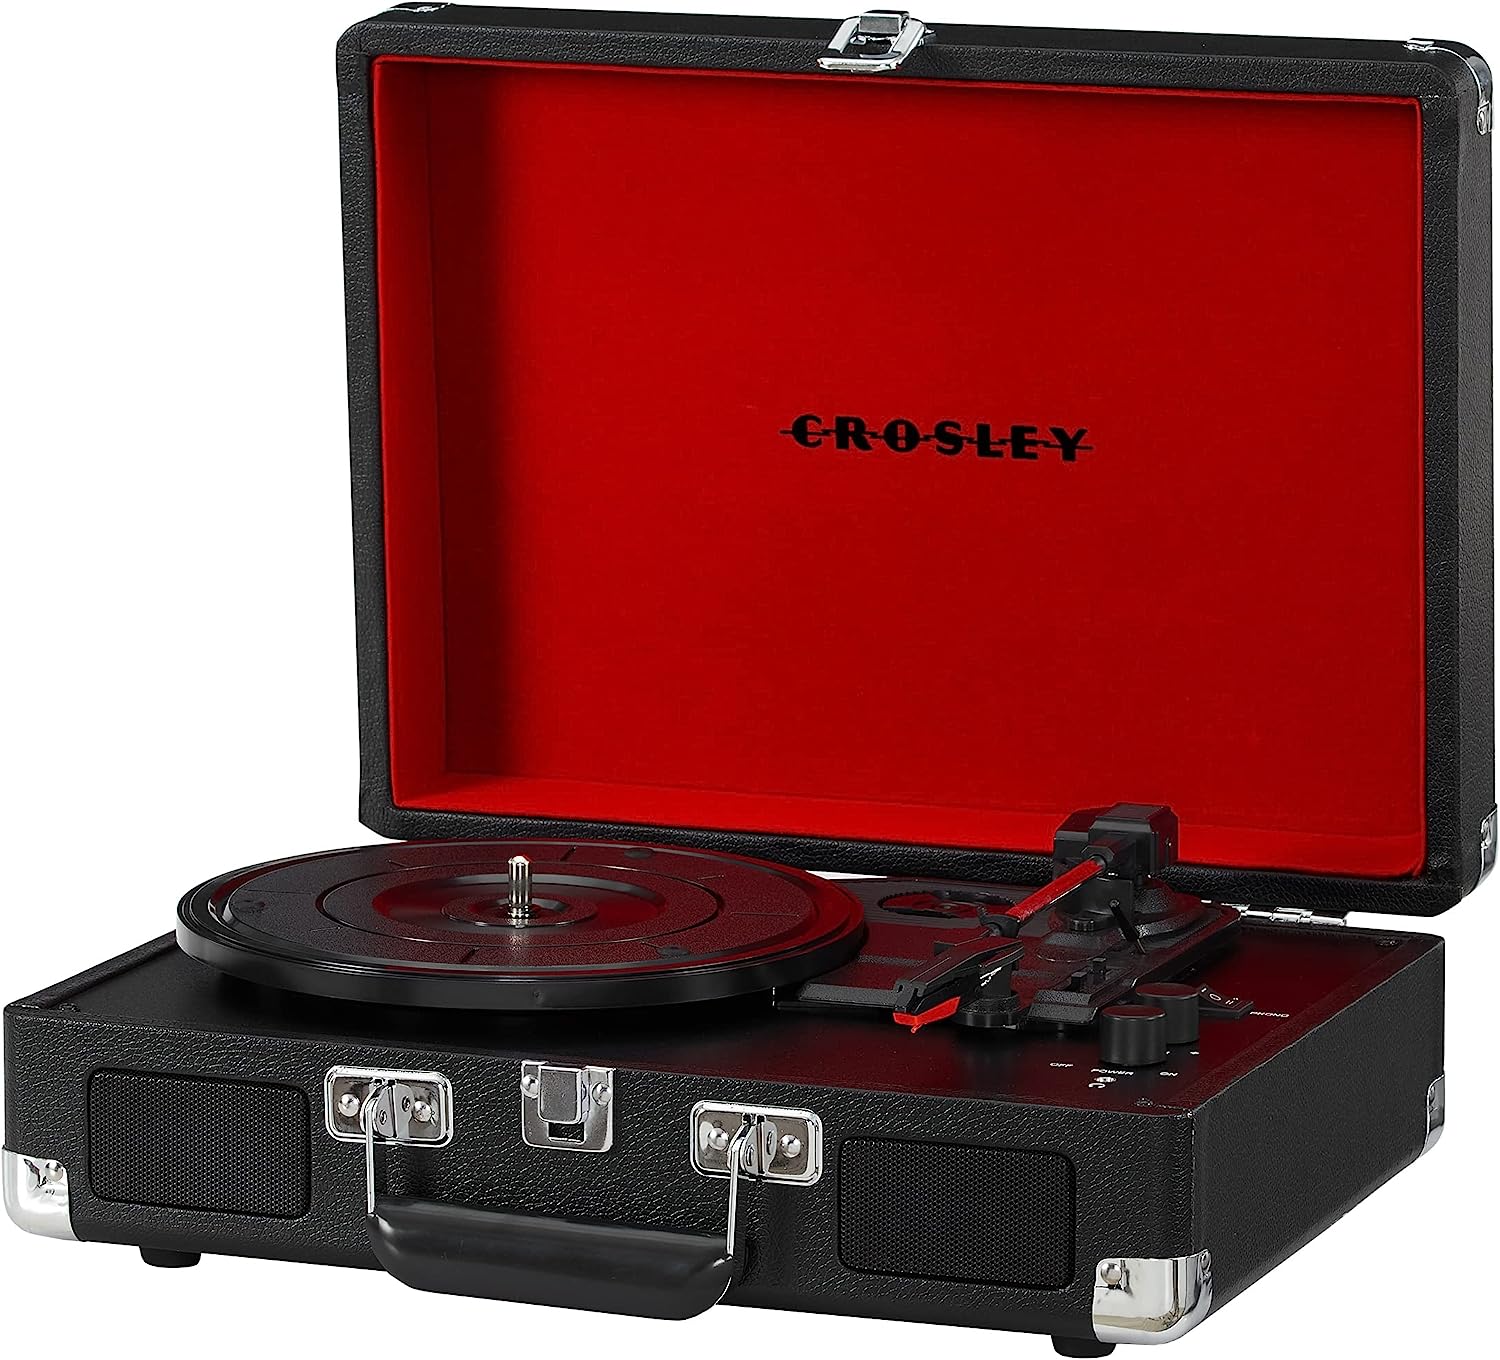 Crosley CR8005F-MT Cruiser Plus Vintage 3-Speed Bluetooth in/Out Suitcase Vinyl Report Player Turntable, Mint